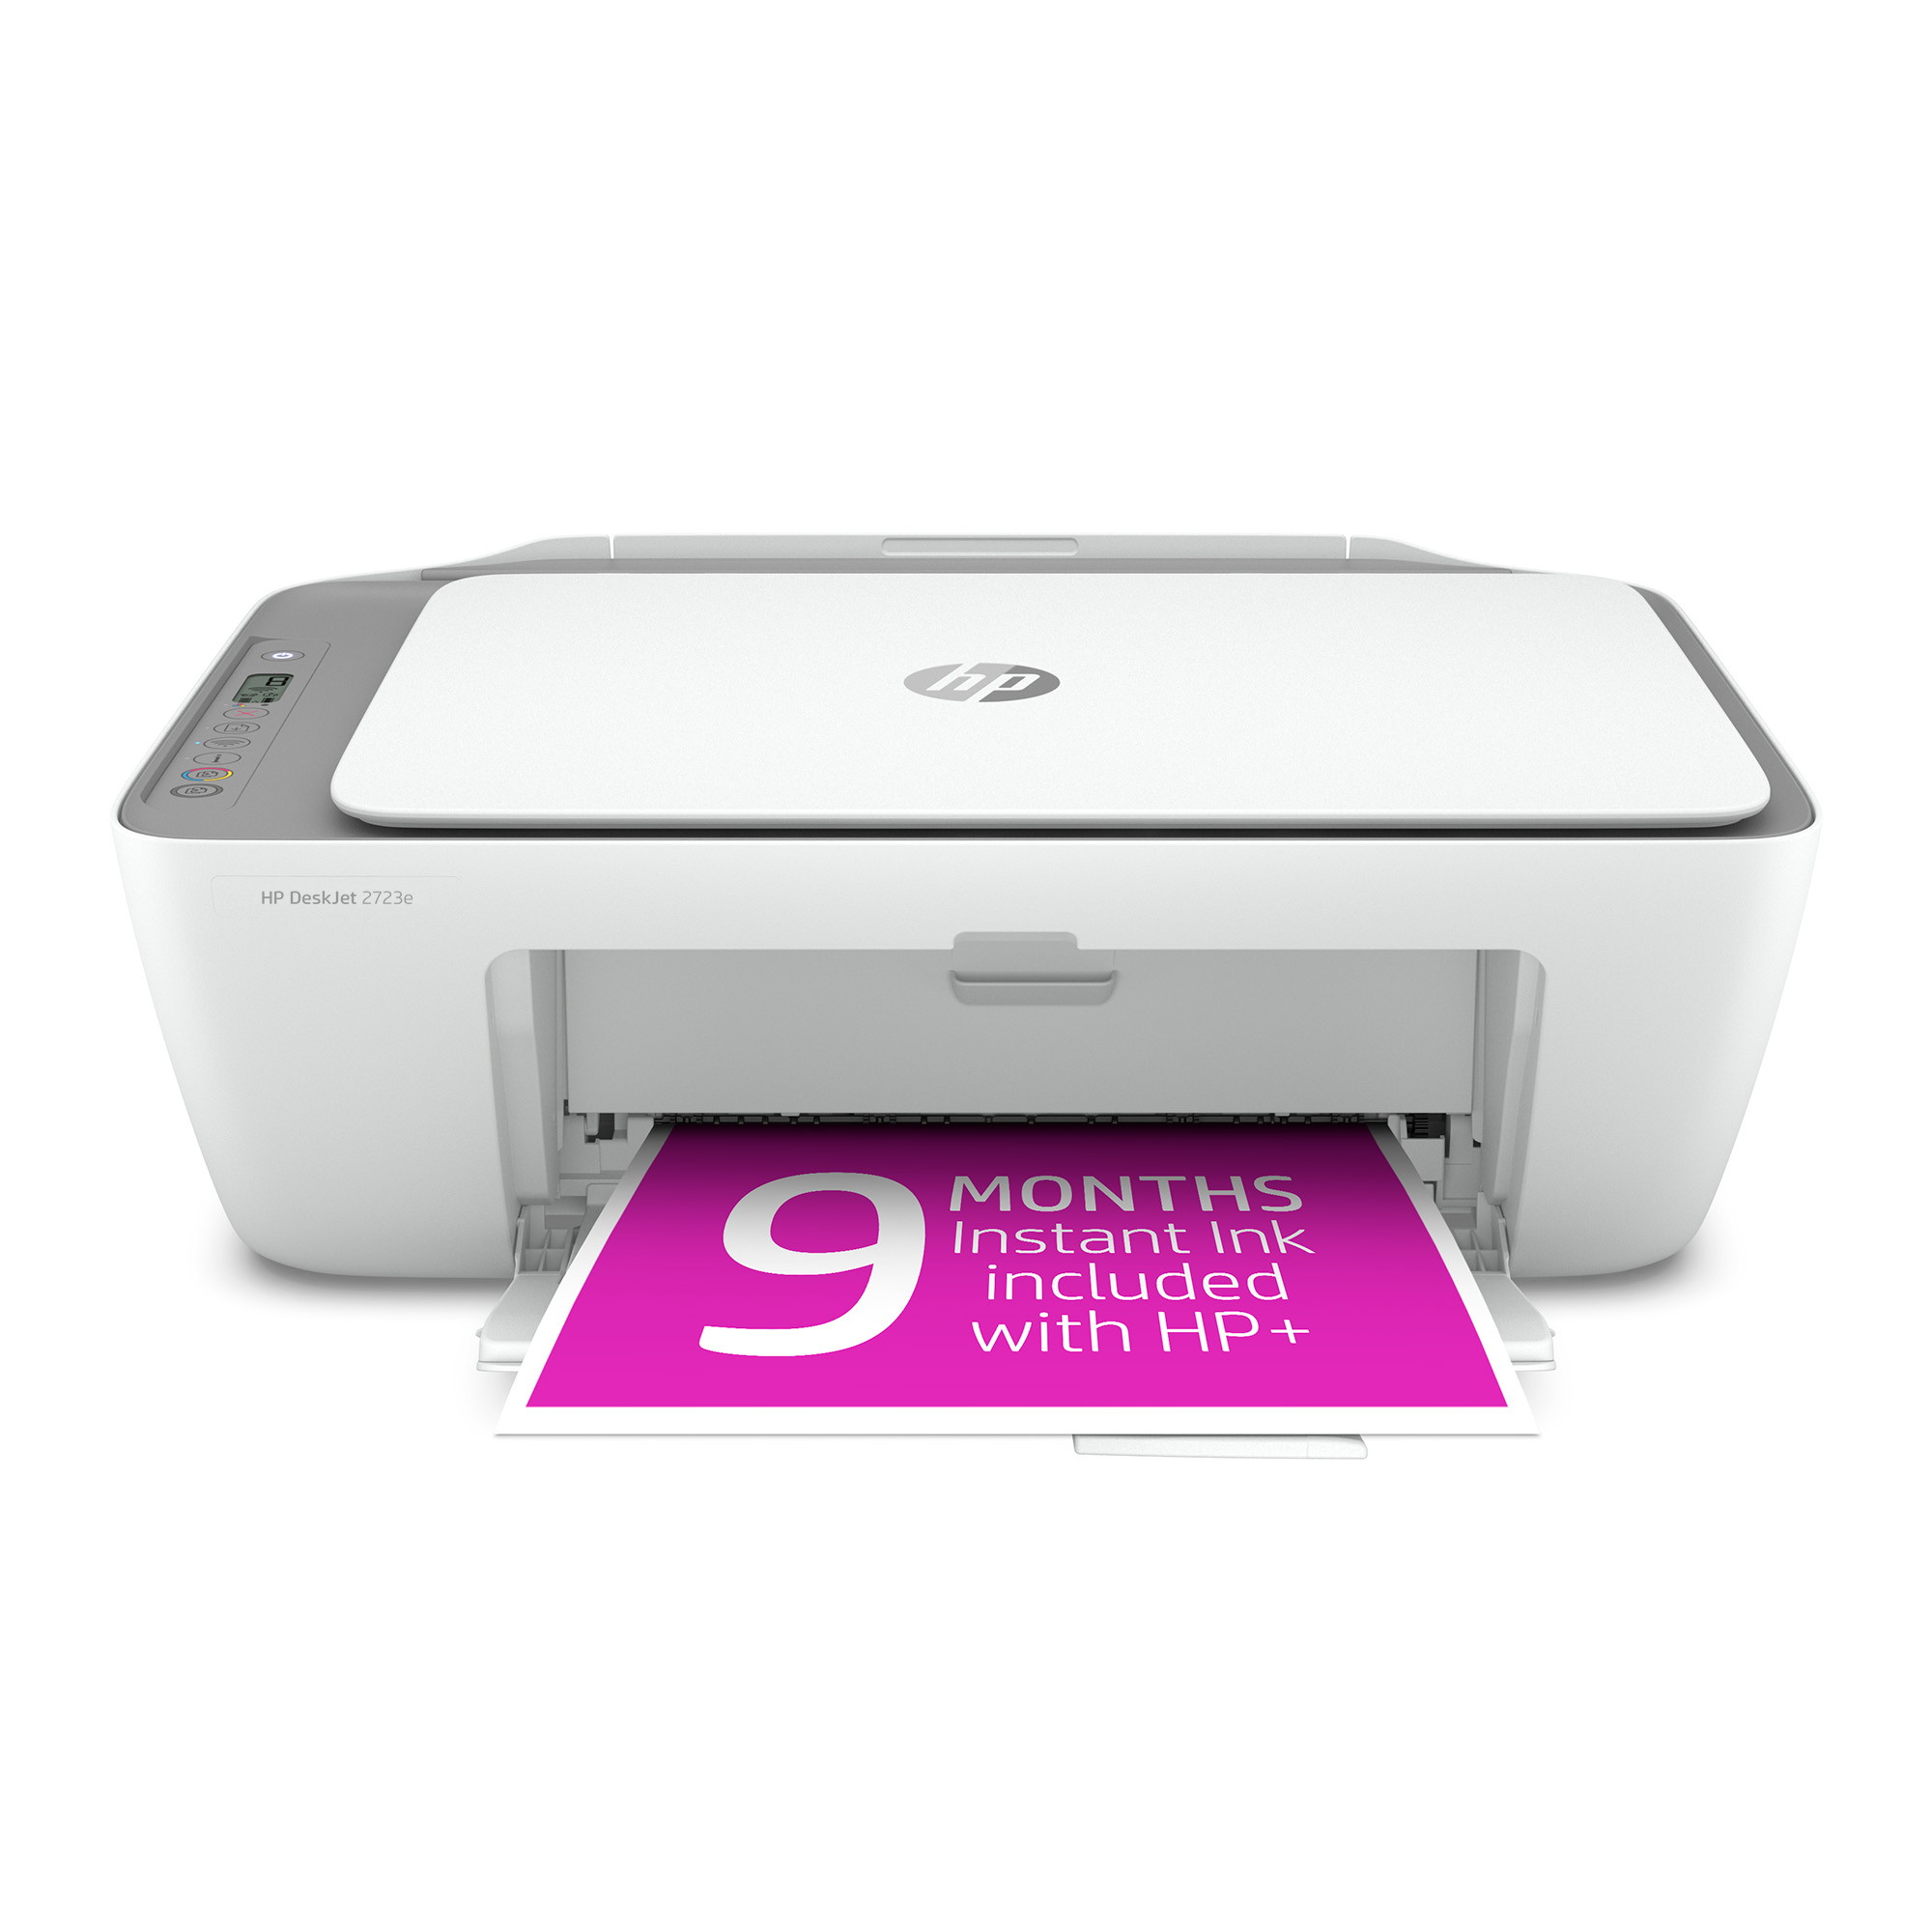 HP DeskJet 2723e All-in-One Wireless Color Inkjet Printer with 9 Months Instant Ink Included with HP+ - image 1 of 10